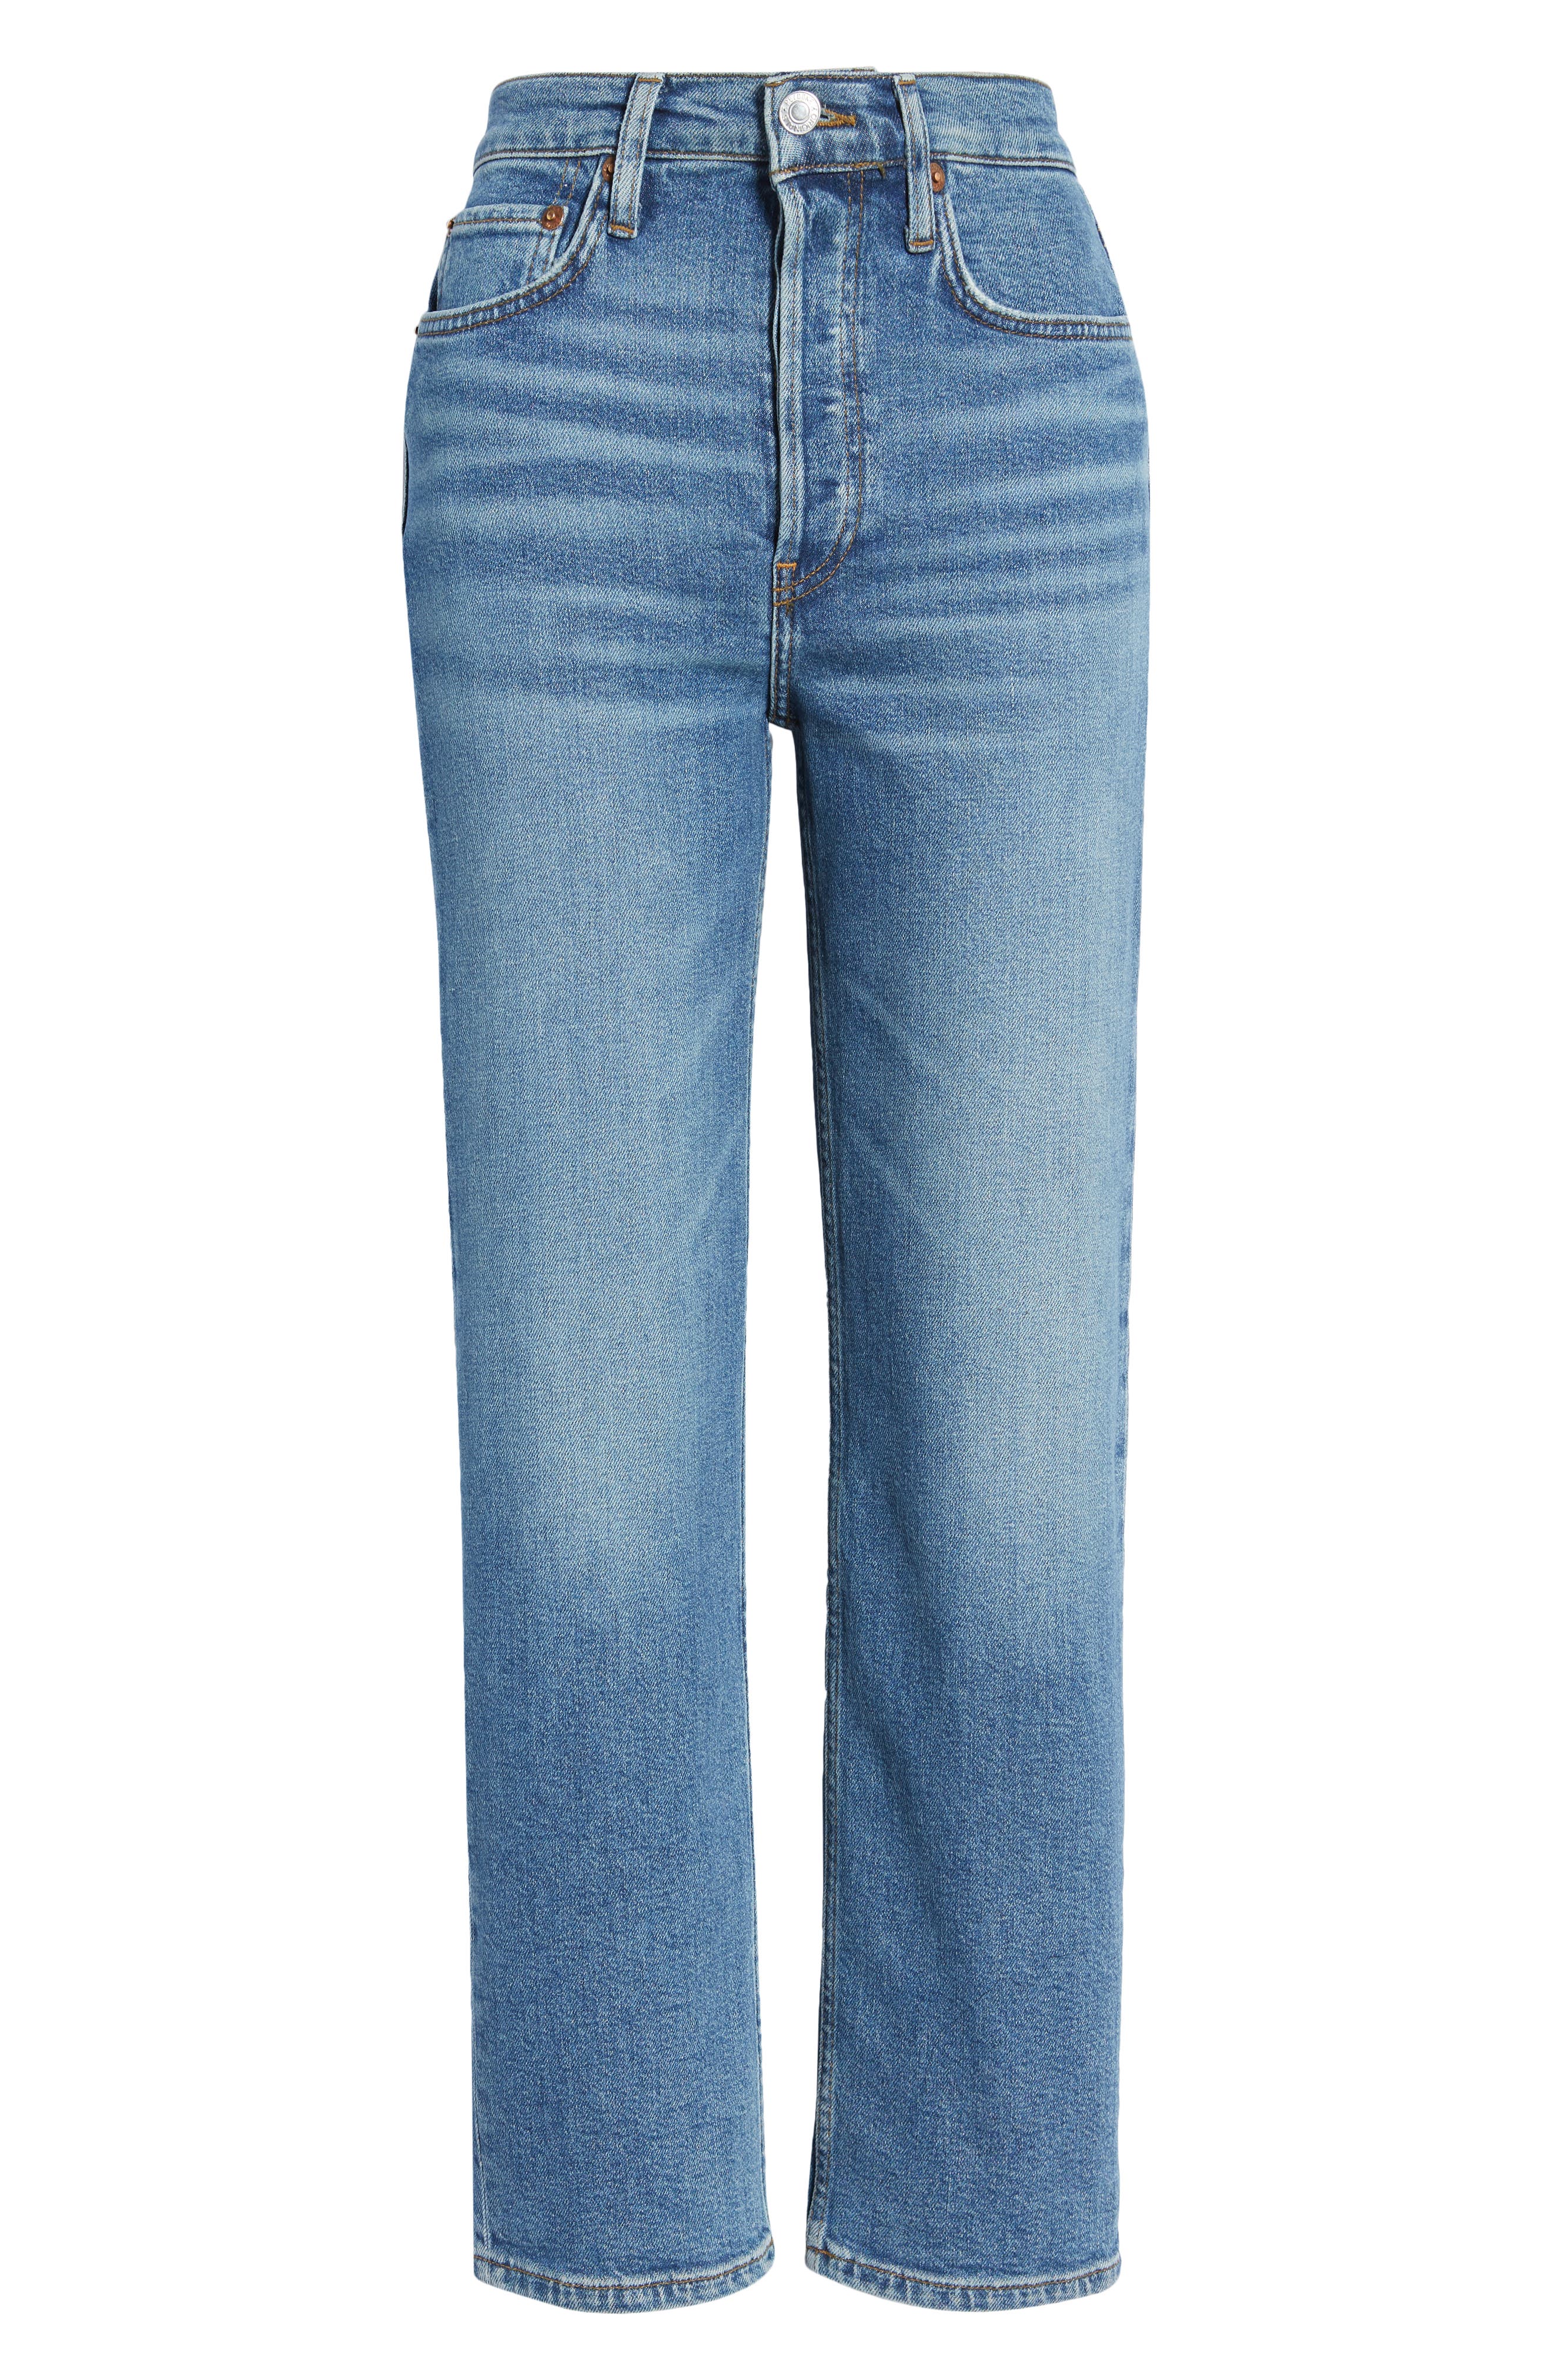 R13 WOMENS JEANS JANE DISCO BLUE flare SIZE 26 25 24 NEW $500 